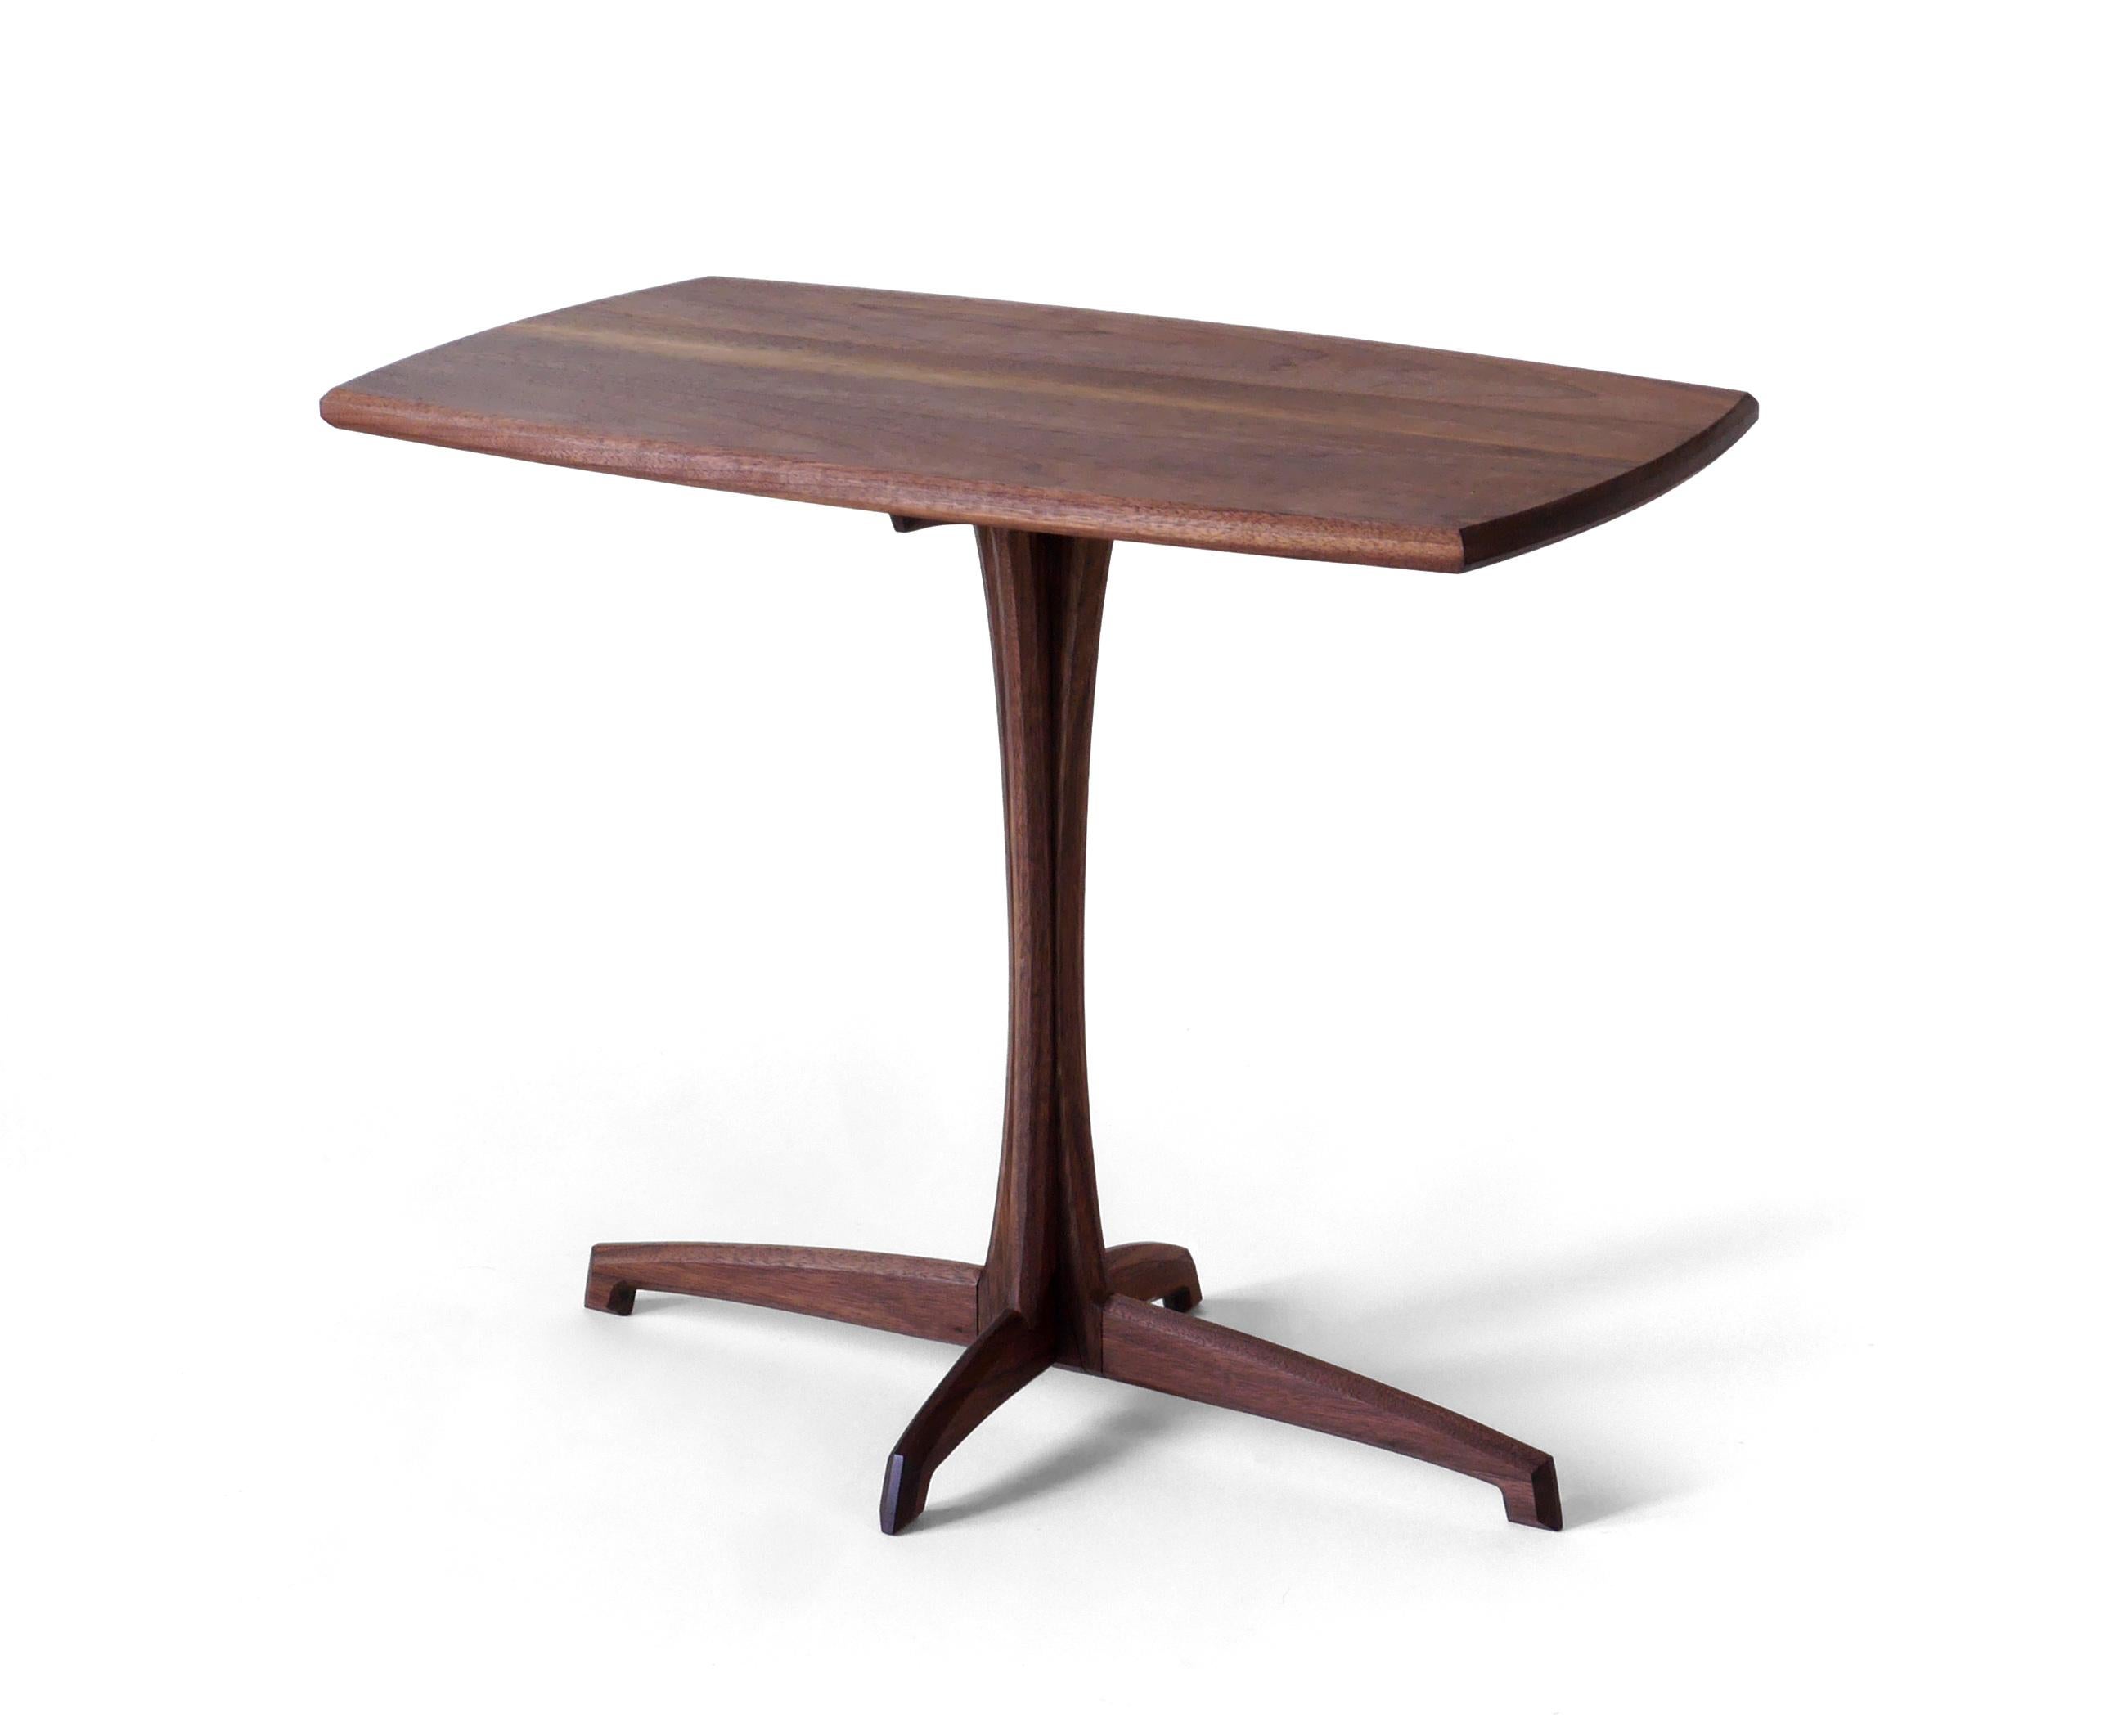 Walnut Plume Side Table, Contemporary Handmade Pedestal End Table by Arid In New Condition For Sale In Albuquerque, NM